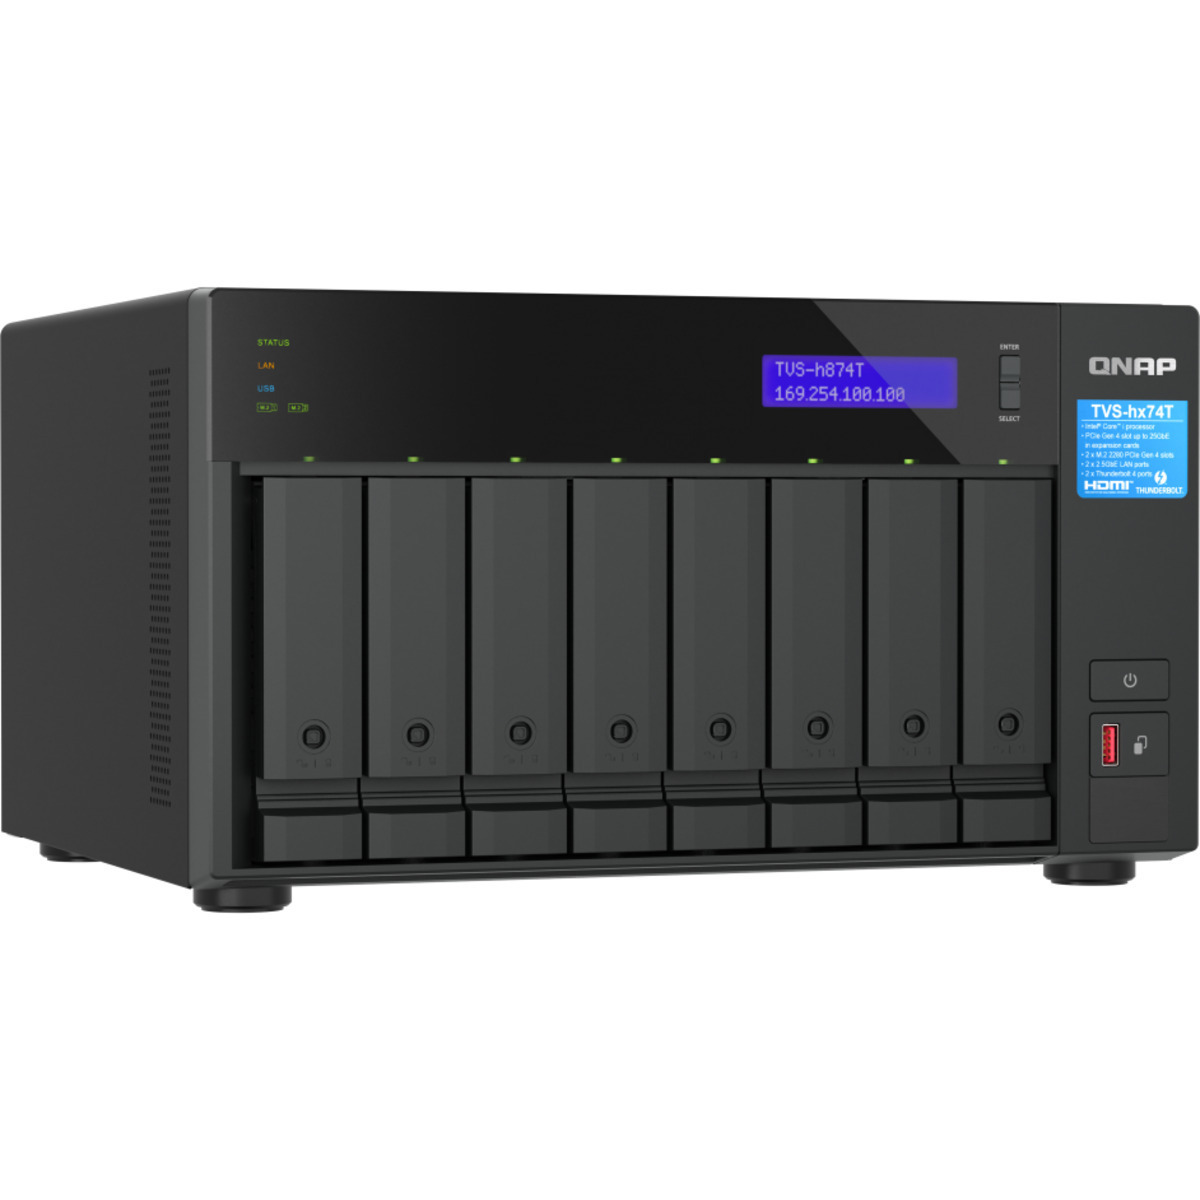 QNAP TVS-h874T Core i9 Thunderbolt 4 12tb 8-Bay Desktop Multimedia / Power User / Business DAS-NAS - Combo Direct + Network Storage Device 6x2tb Seagate BarraCuda ST2000DM008 3.5 7200rpm SATA 6Gb/s HDD CONSUMER Class Drives Installed - Burn-In Tested TVS-h874T Core i9 Thunderbolt 4